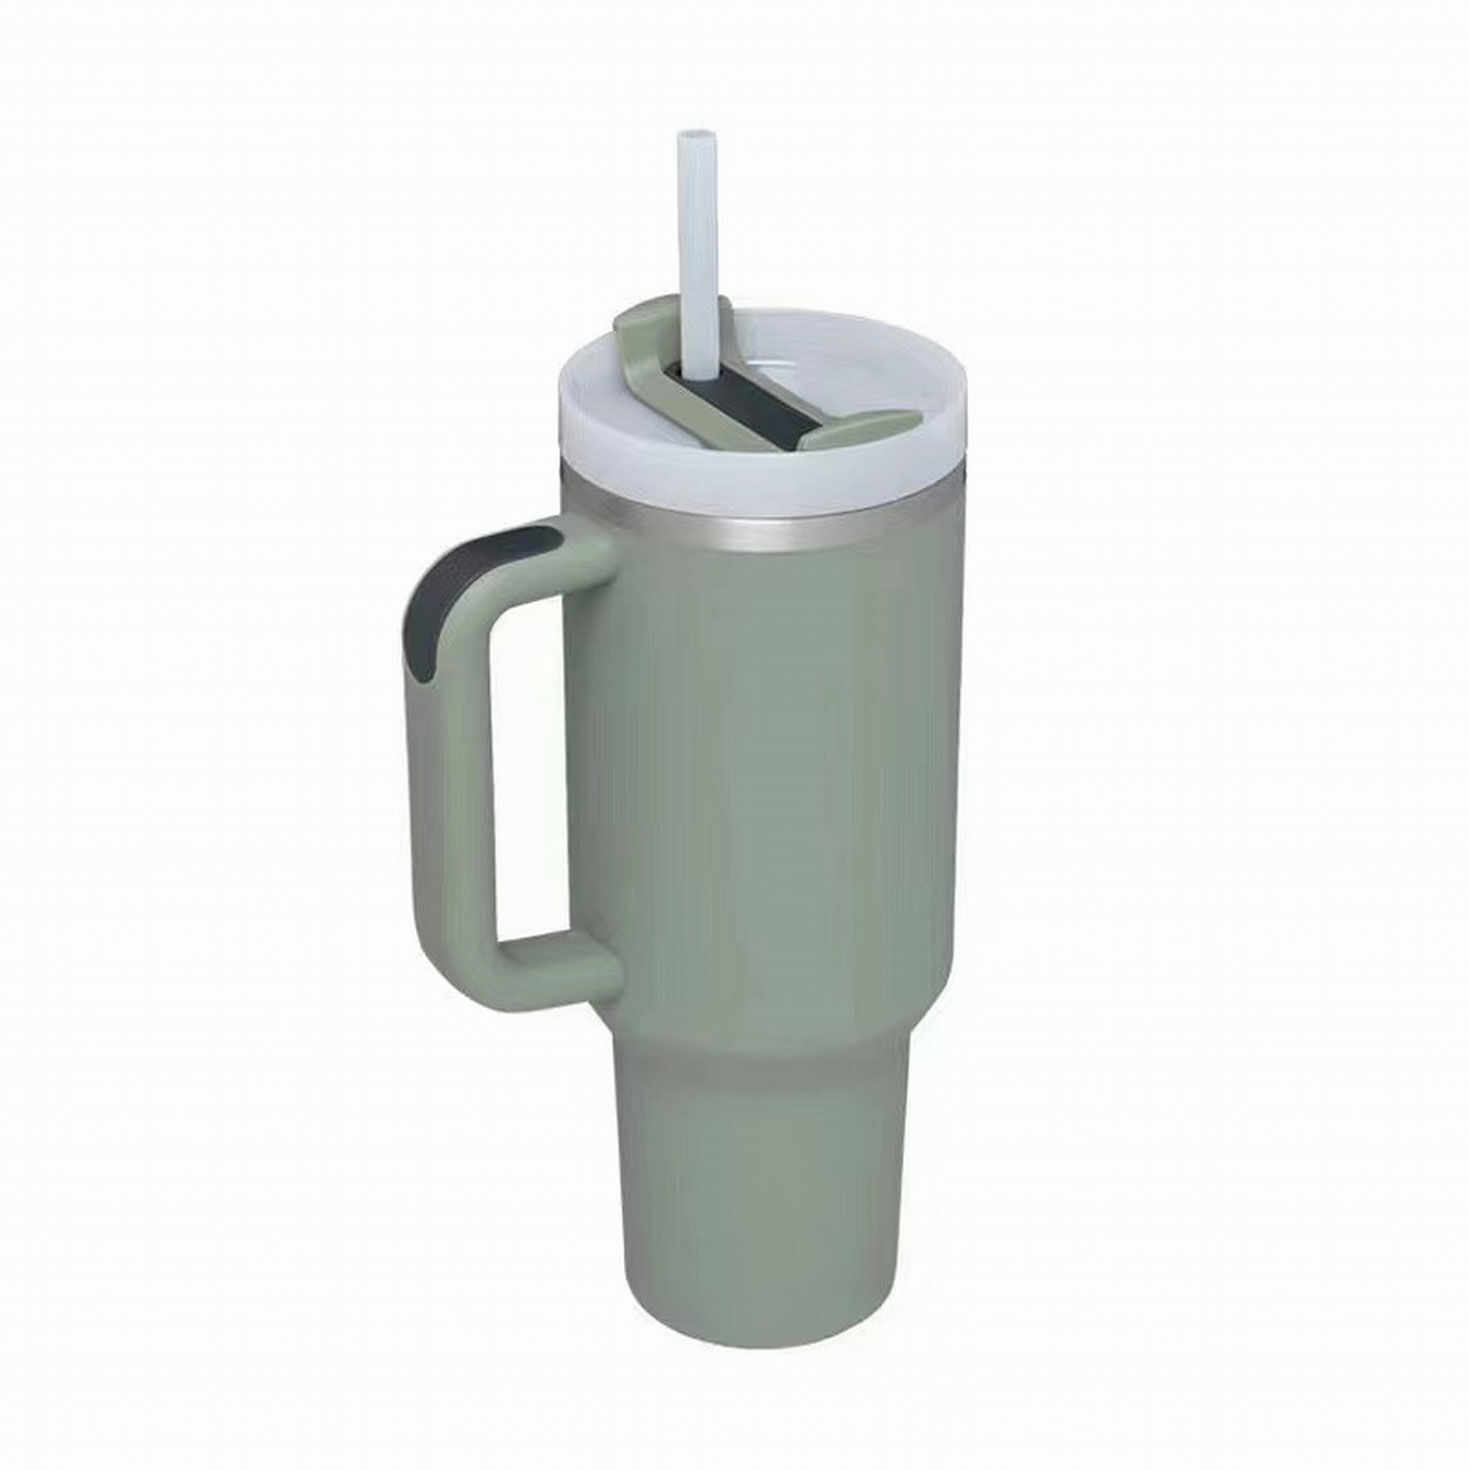 https://www.hallmark.com/dw/image/v2/AALB_PRD/on/demandware.static/-/Sites-hallmark-master/default/dwf4bf1424/images/finished-goods/products/P29/Green-Stainless-Steel-Travel-Mug-With-Handle-and-Straw_P29_01.jpg?sfrm=jpg